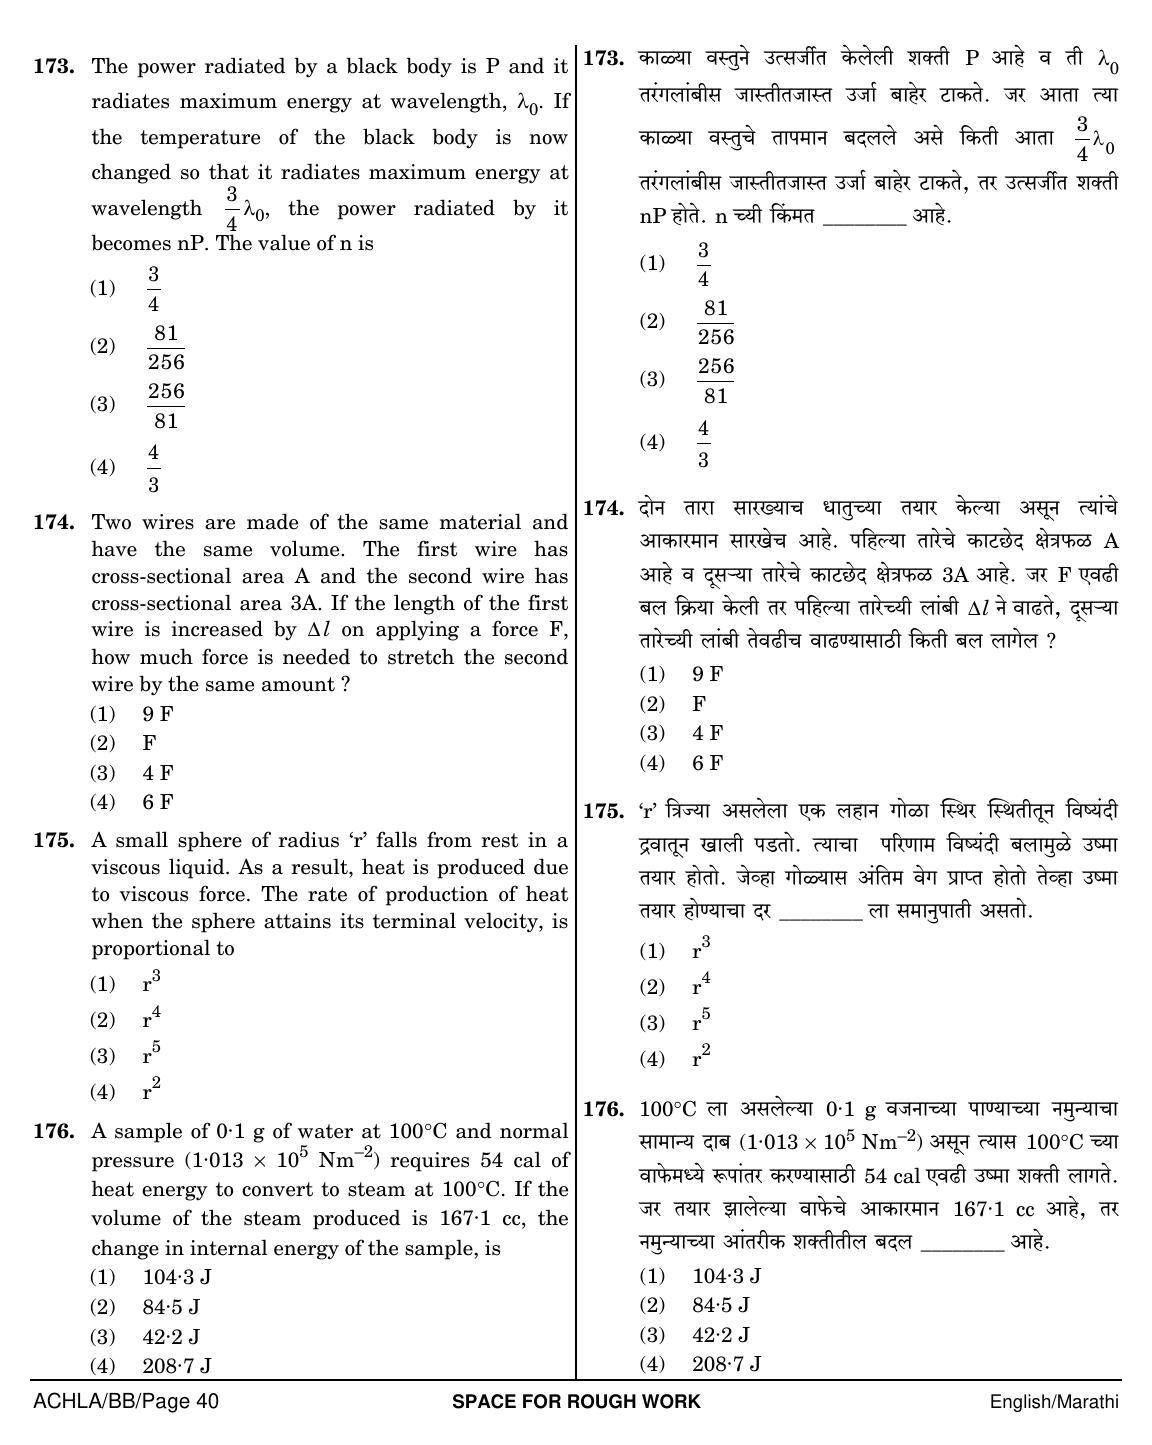 NEET Marathi BB 2018 Question Paper - Page 40